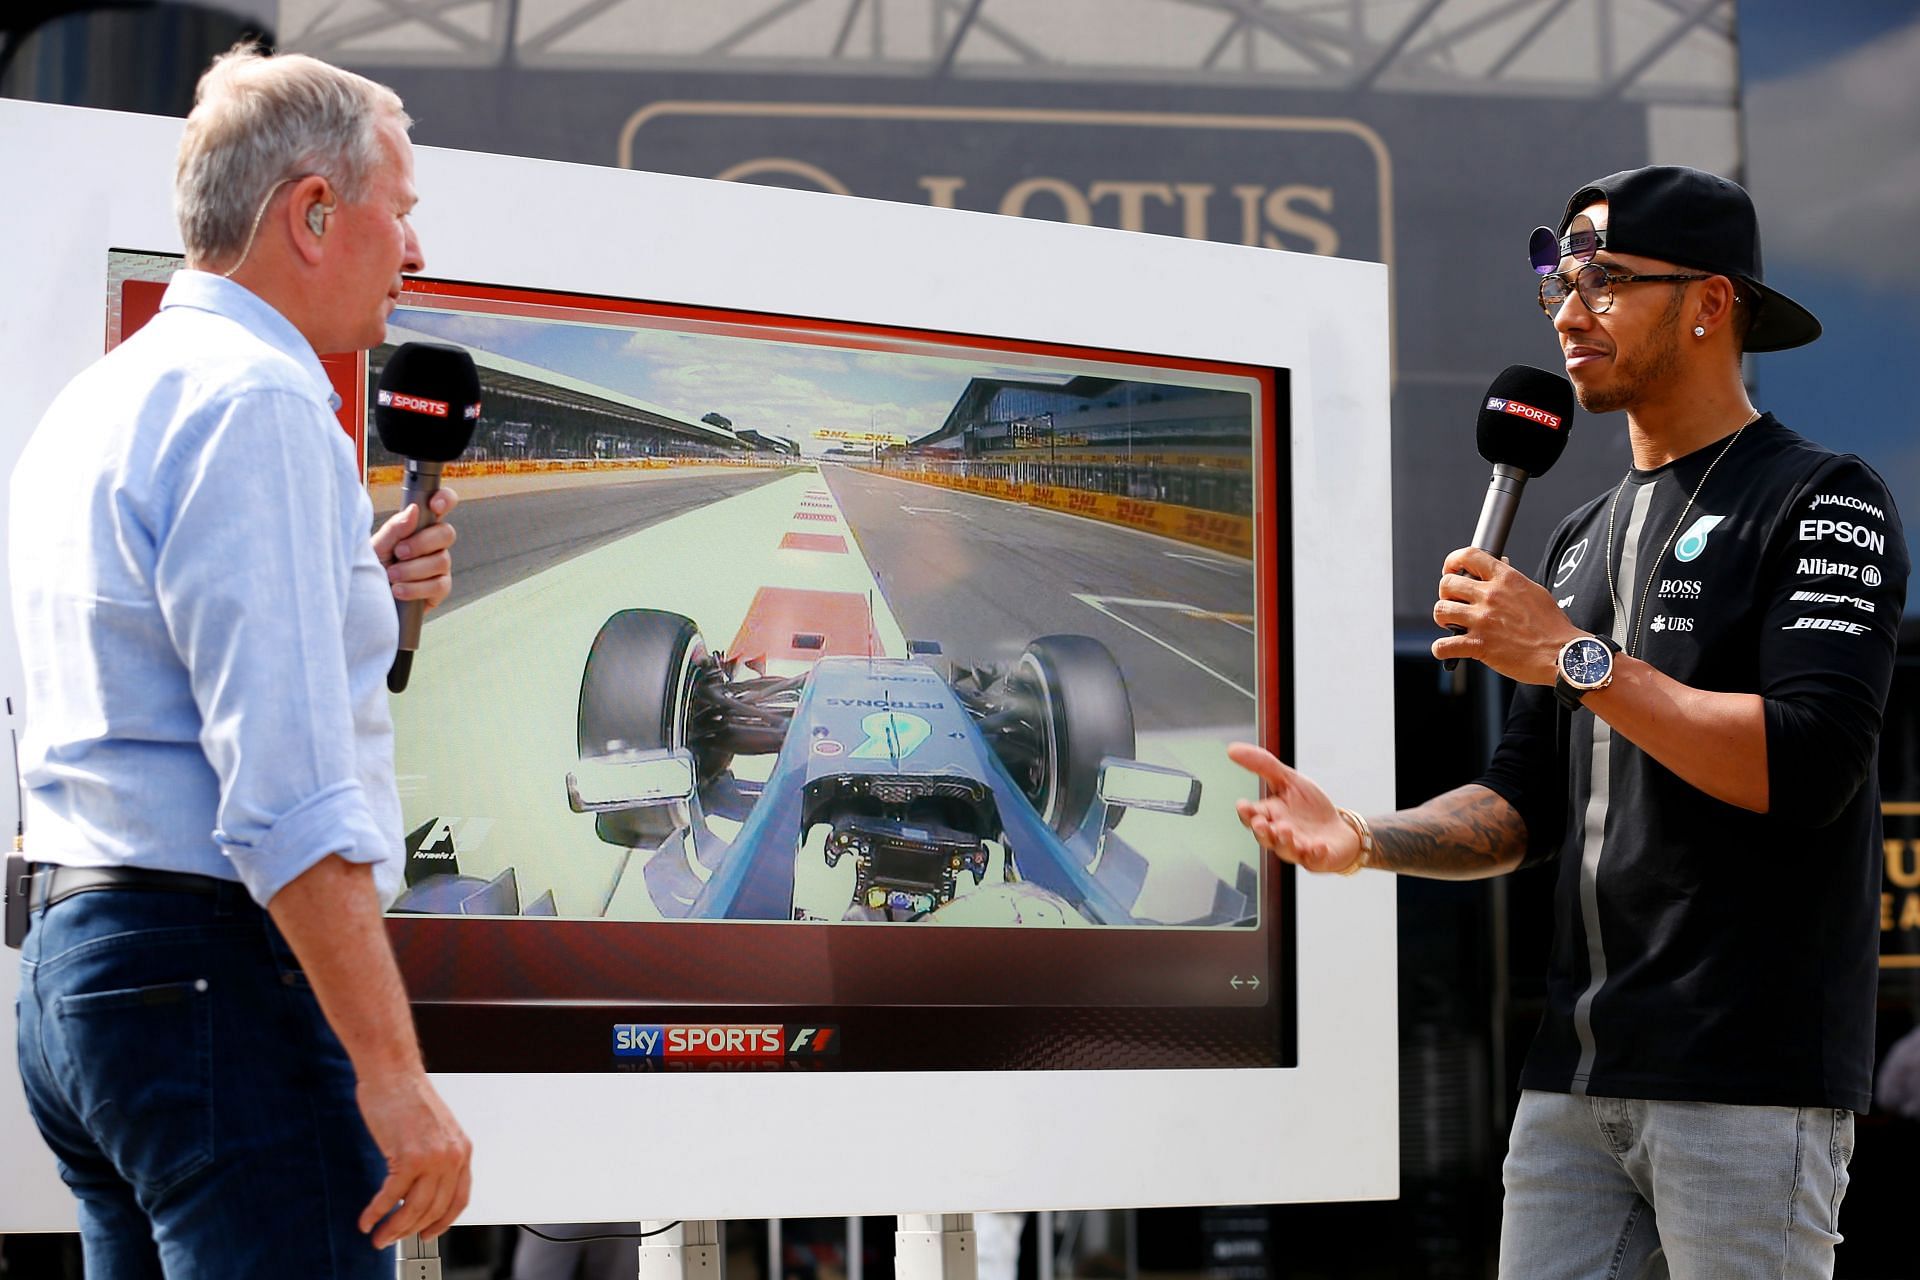 Martin Brundle (left) and Lewis Hamilton (right) at the 2015 British Grand Prix. (Photo by Charles Coates/Getty Images)